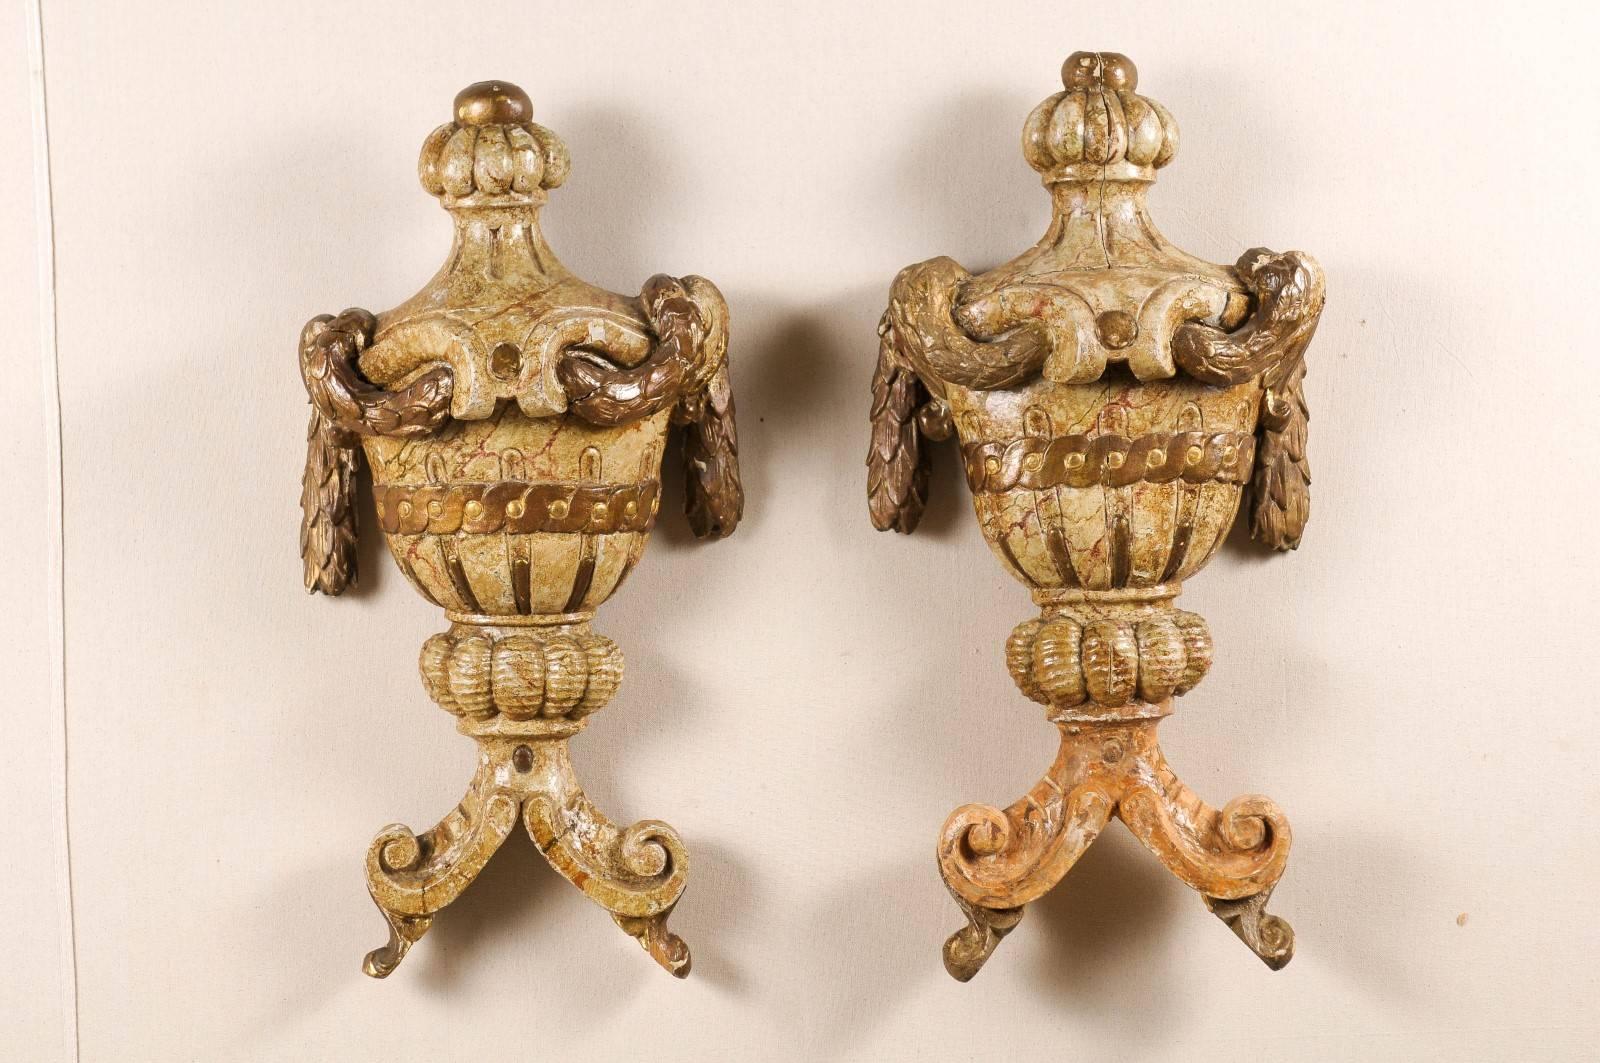 A pair of architectural ornaments. This pair of Italian wall hanging wooden fragments from the 19th century features two richly carved and marbleized urns decorated with swags on the lid and a guilloche frieze. In the lower part, the fragments are